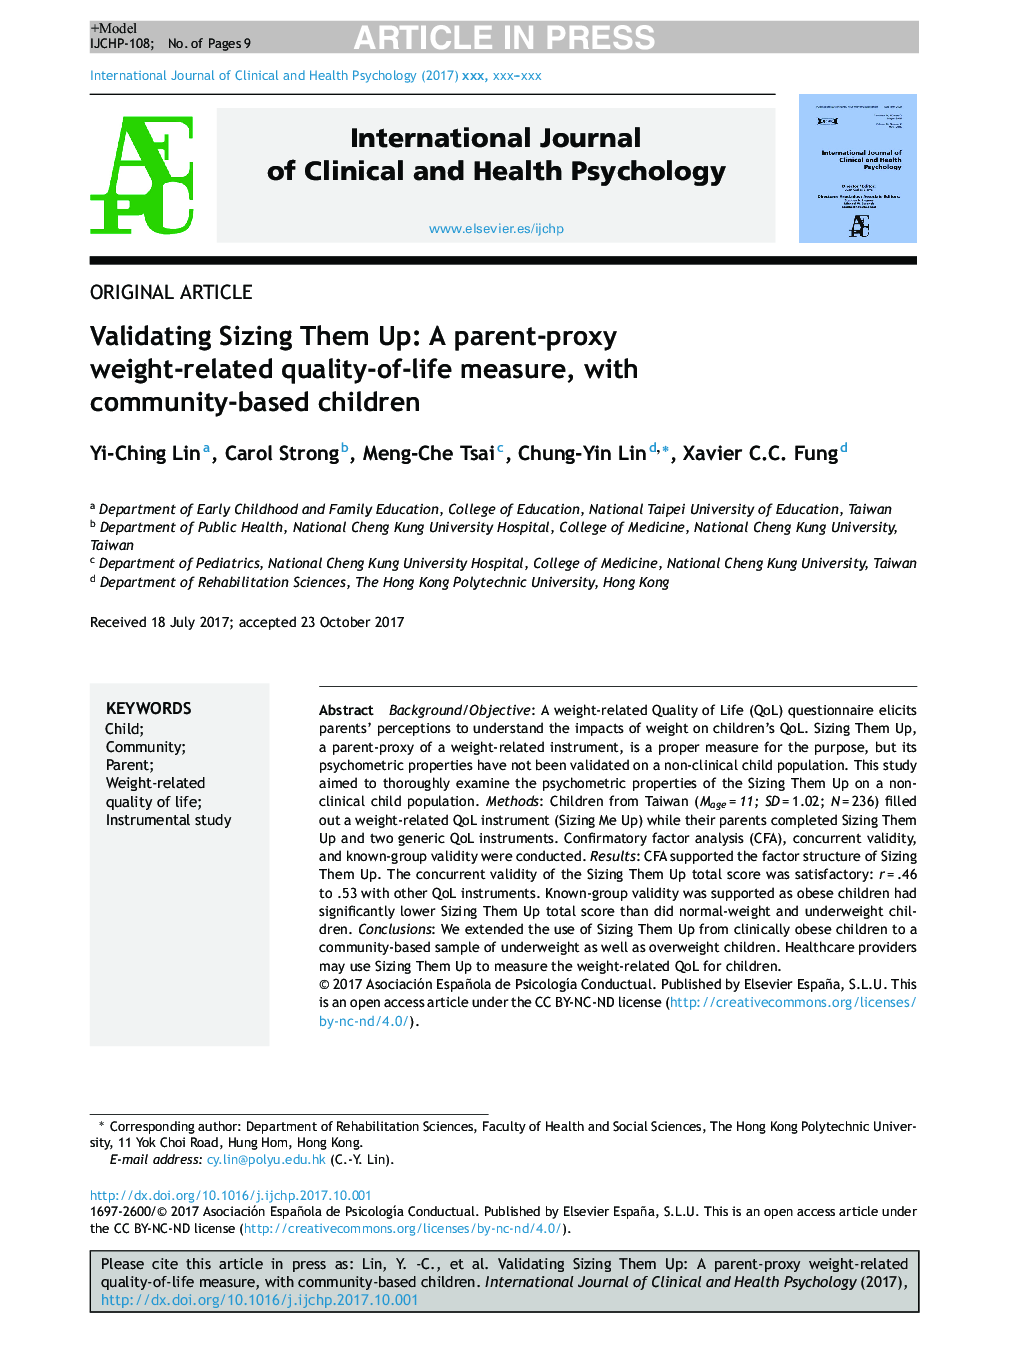 Validating Sizing Them Up: A parent-proxy weight-related quality-of-life measure, with community-based children